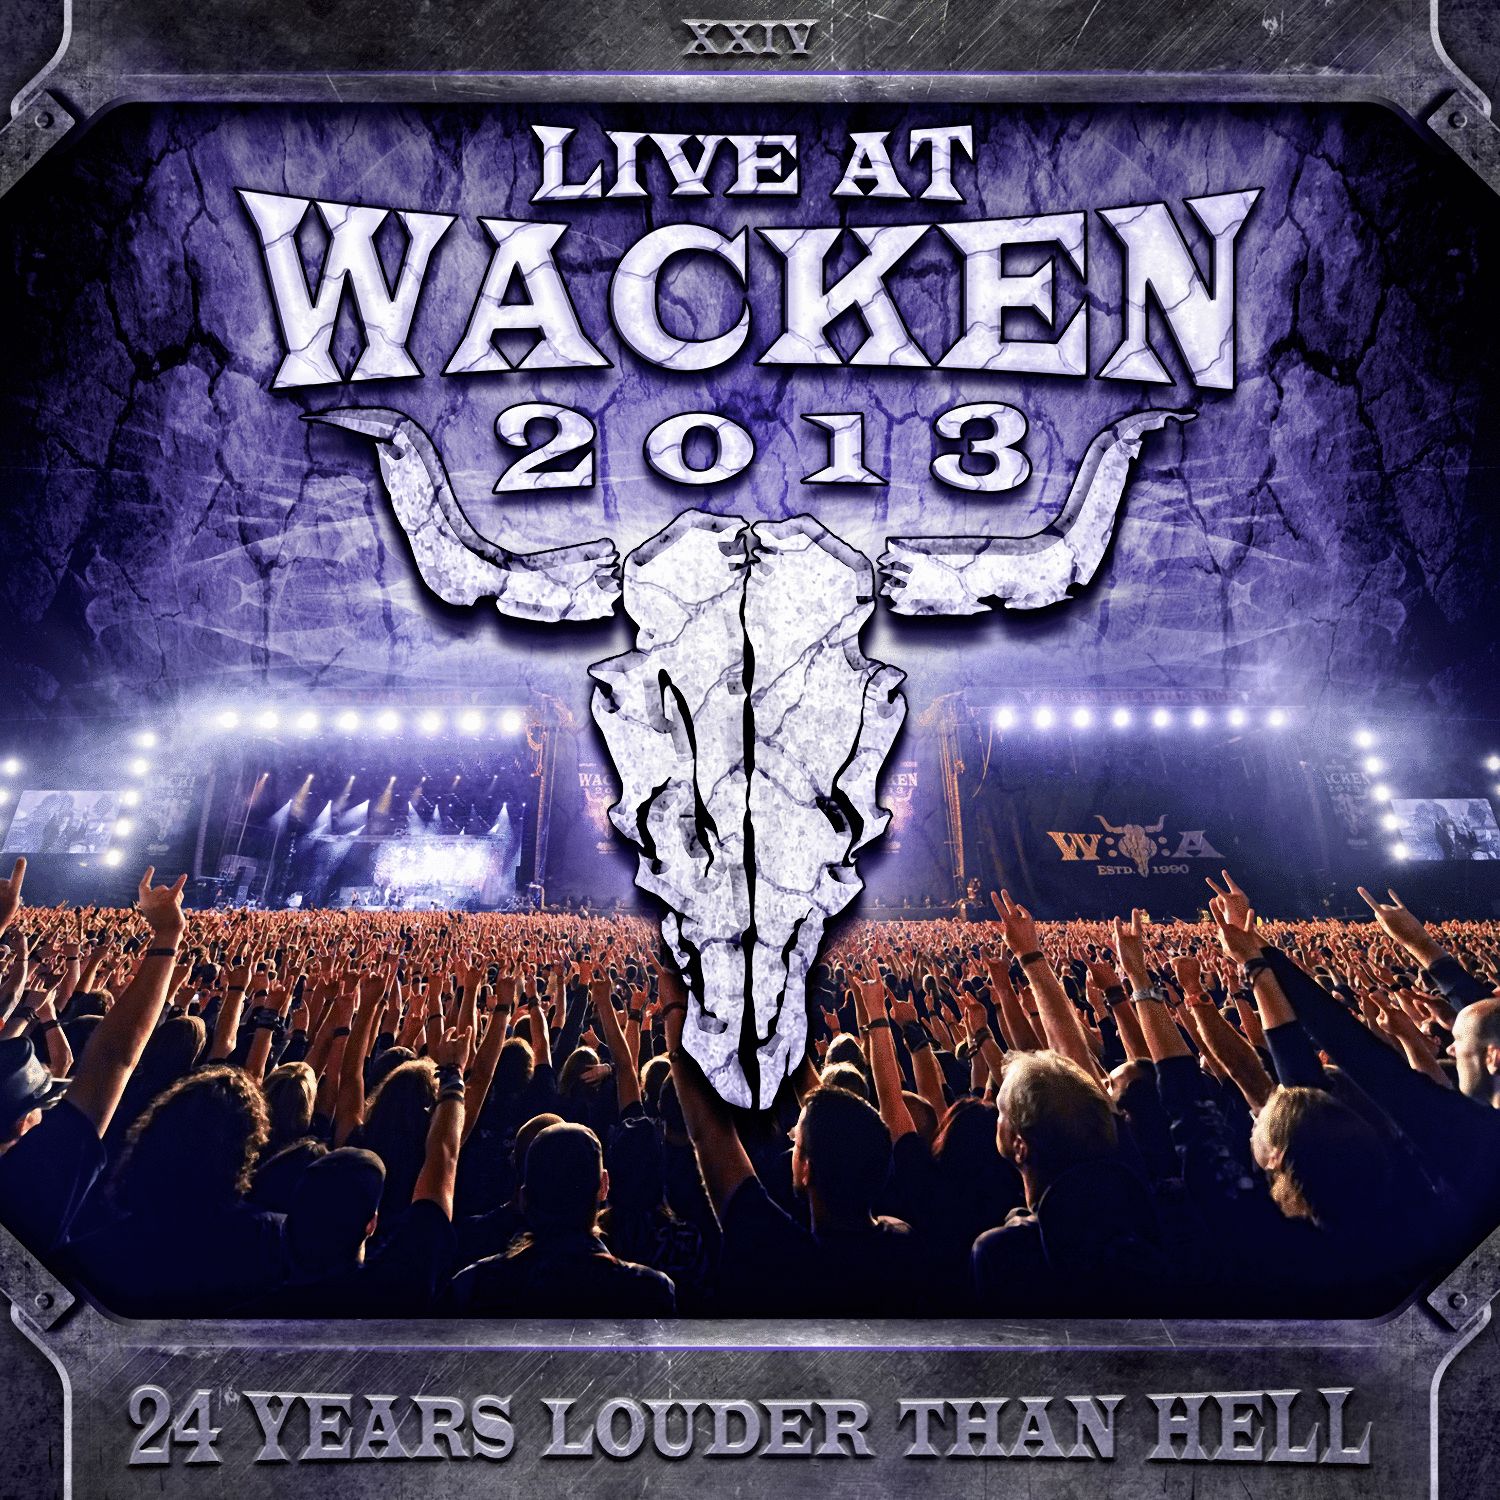 I Love You More Than Rock 'n' Roll (Live At Wacken 2013)